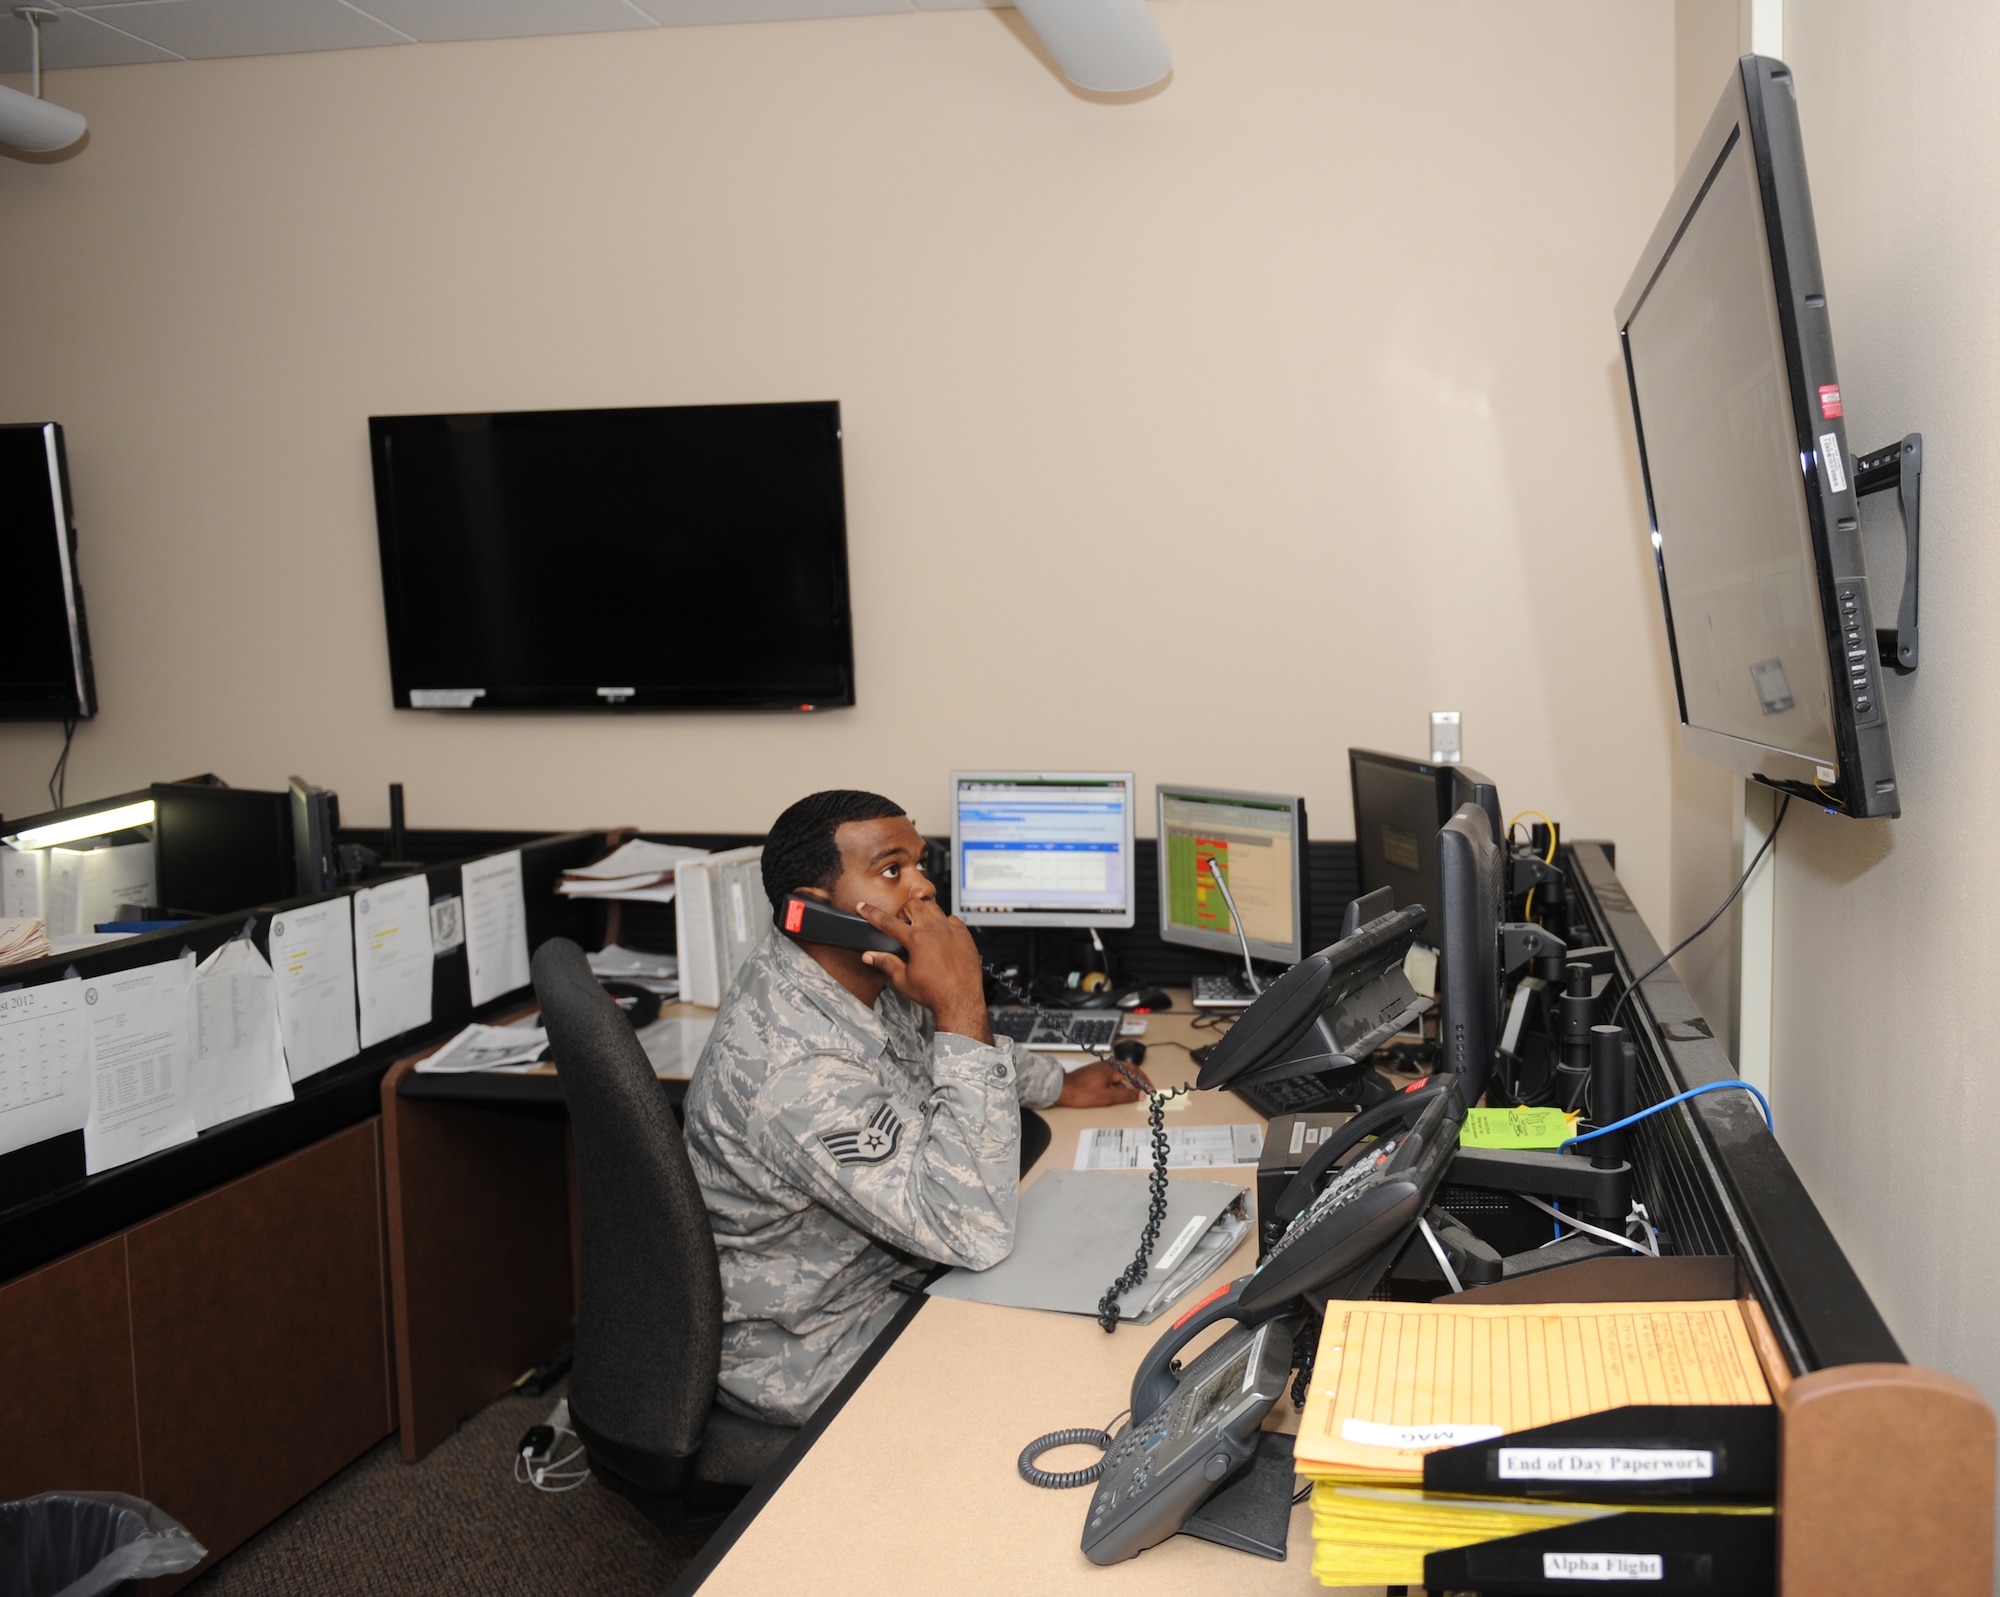 Staff Sgt. Vernard Warner, 2nd Security Forces Squadron, talks on the phone while watching surveillance video at the 2 SFS complex on Barksdale Air Force Base, La., Aug. 10. The 2 SFS monitors all of the gates on base as well as the entrances to the flightline to ensure there are no unauthorized entrances. If someone were to breach the base or flightline perimeter, the 2 SFS would alert the Airmen on patrol. (U.S. Air Force photo/Airman 1st Class Benjamin Gonsier)(RELEASED)